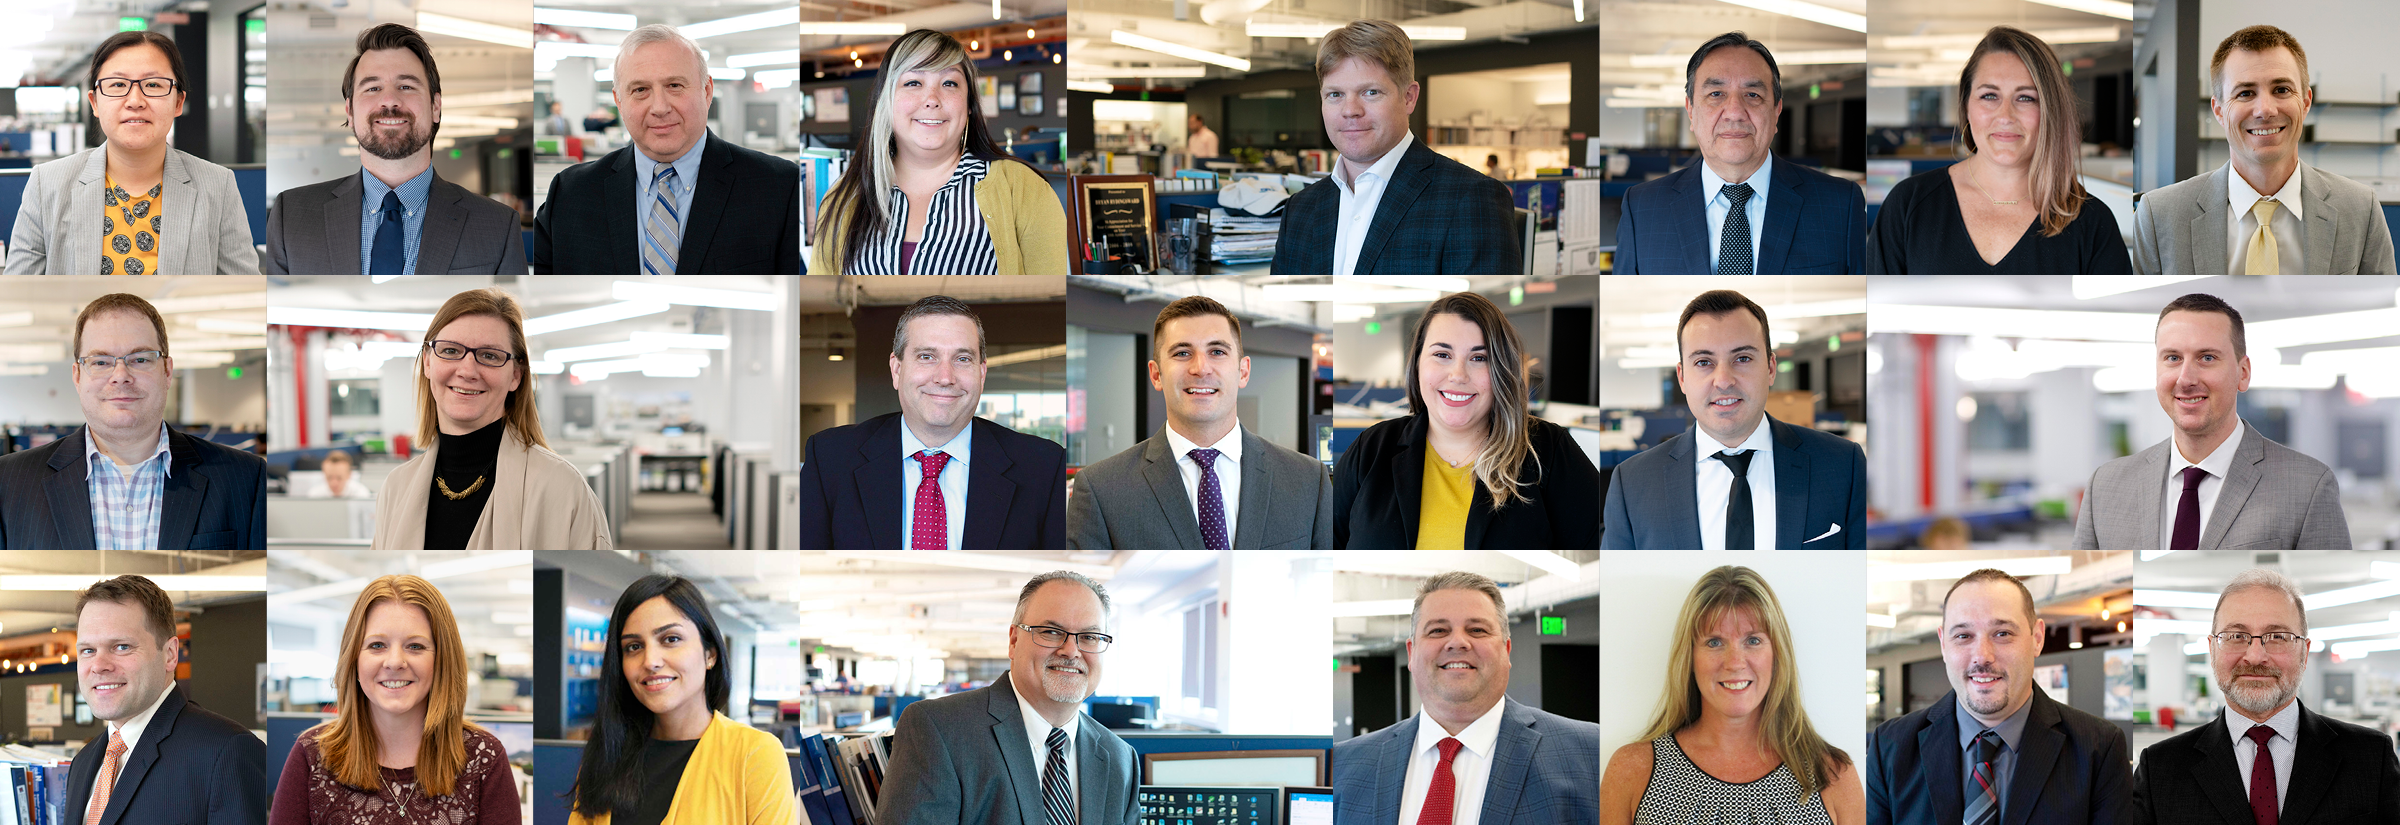 Announcing our latest BR+A staff promotions! Please join us in congratulating our newly promoted Associate Principals, Senior Associates, and Associates. You can view our digital announcement brochure by clicking on this image or on the link below.